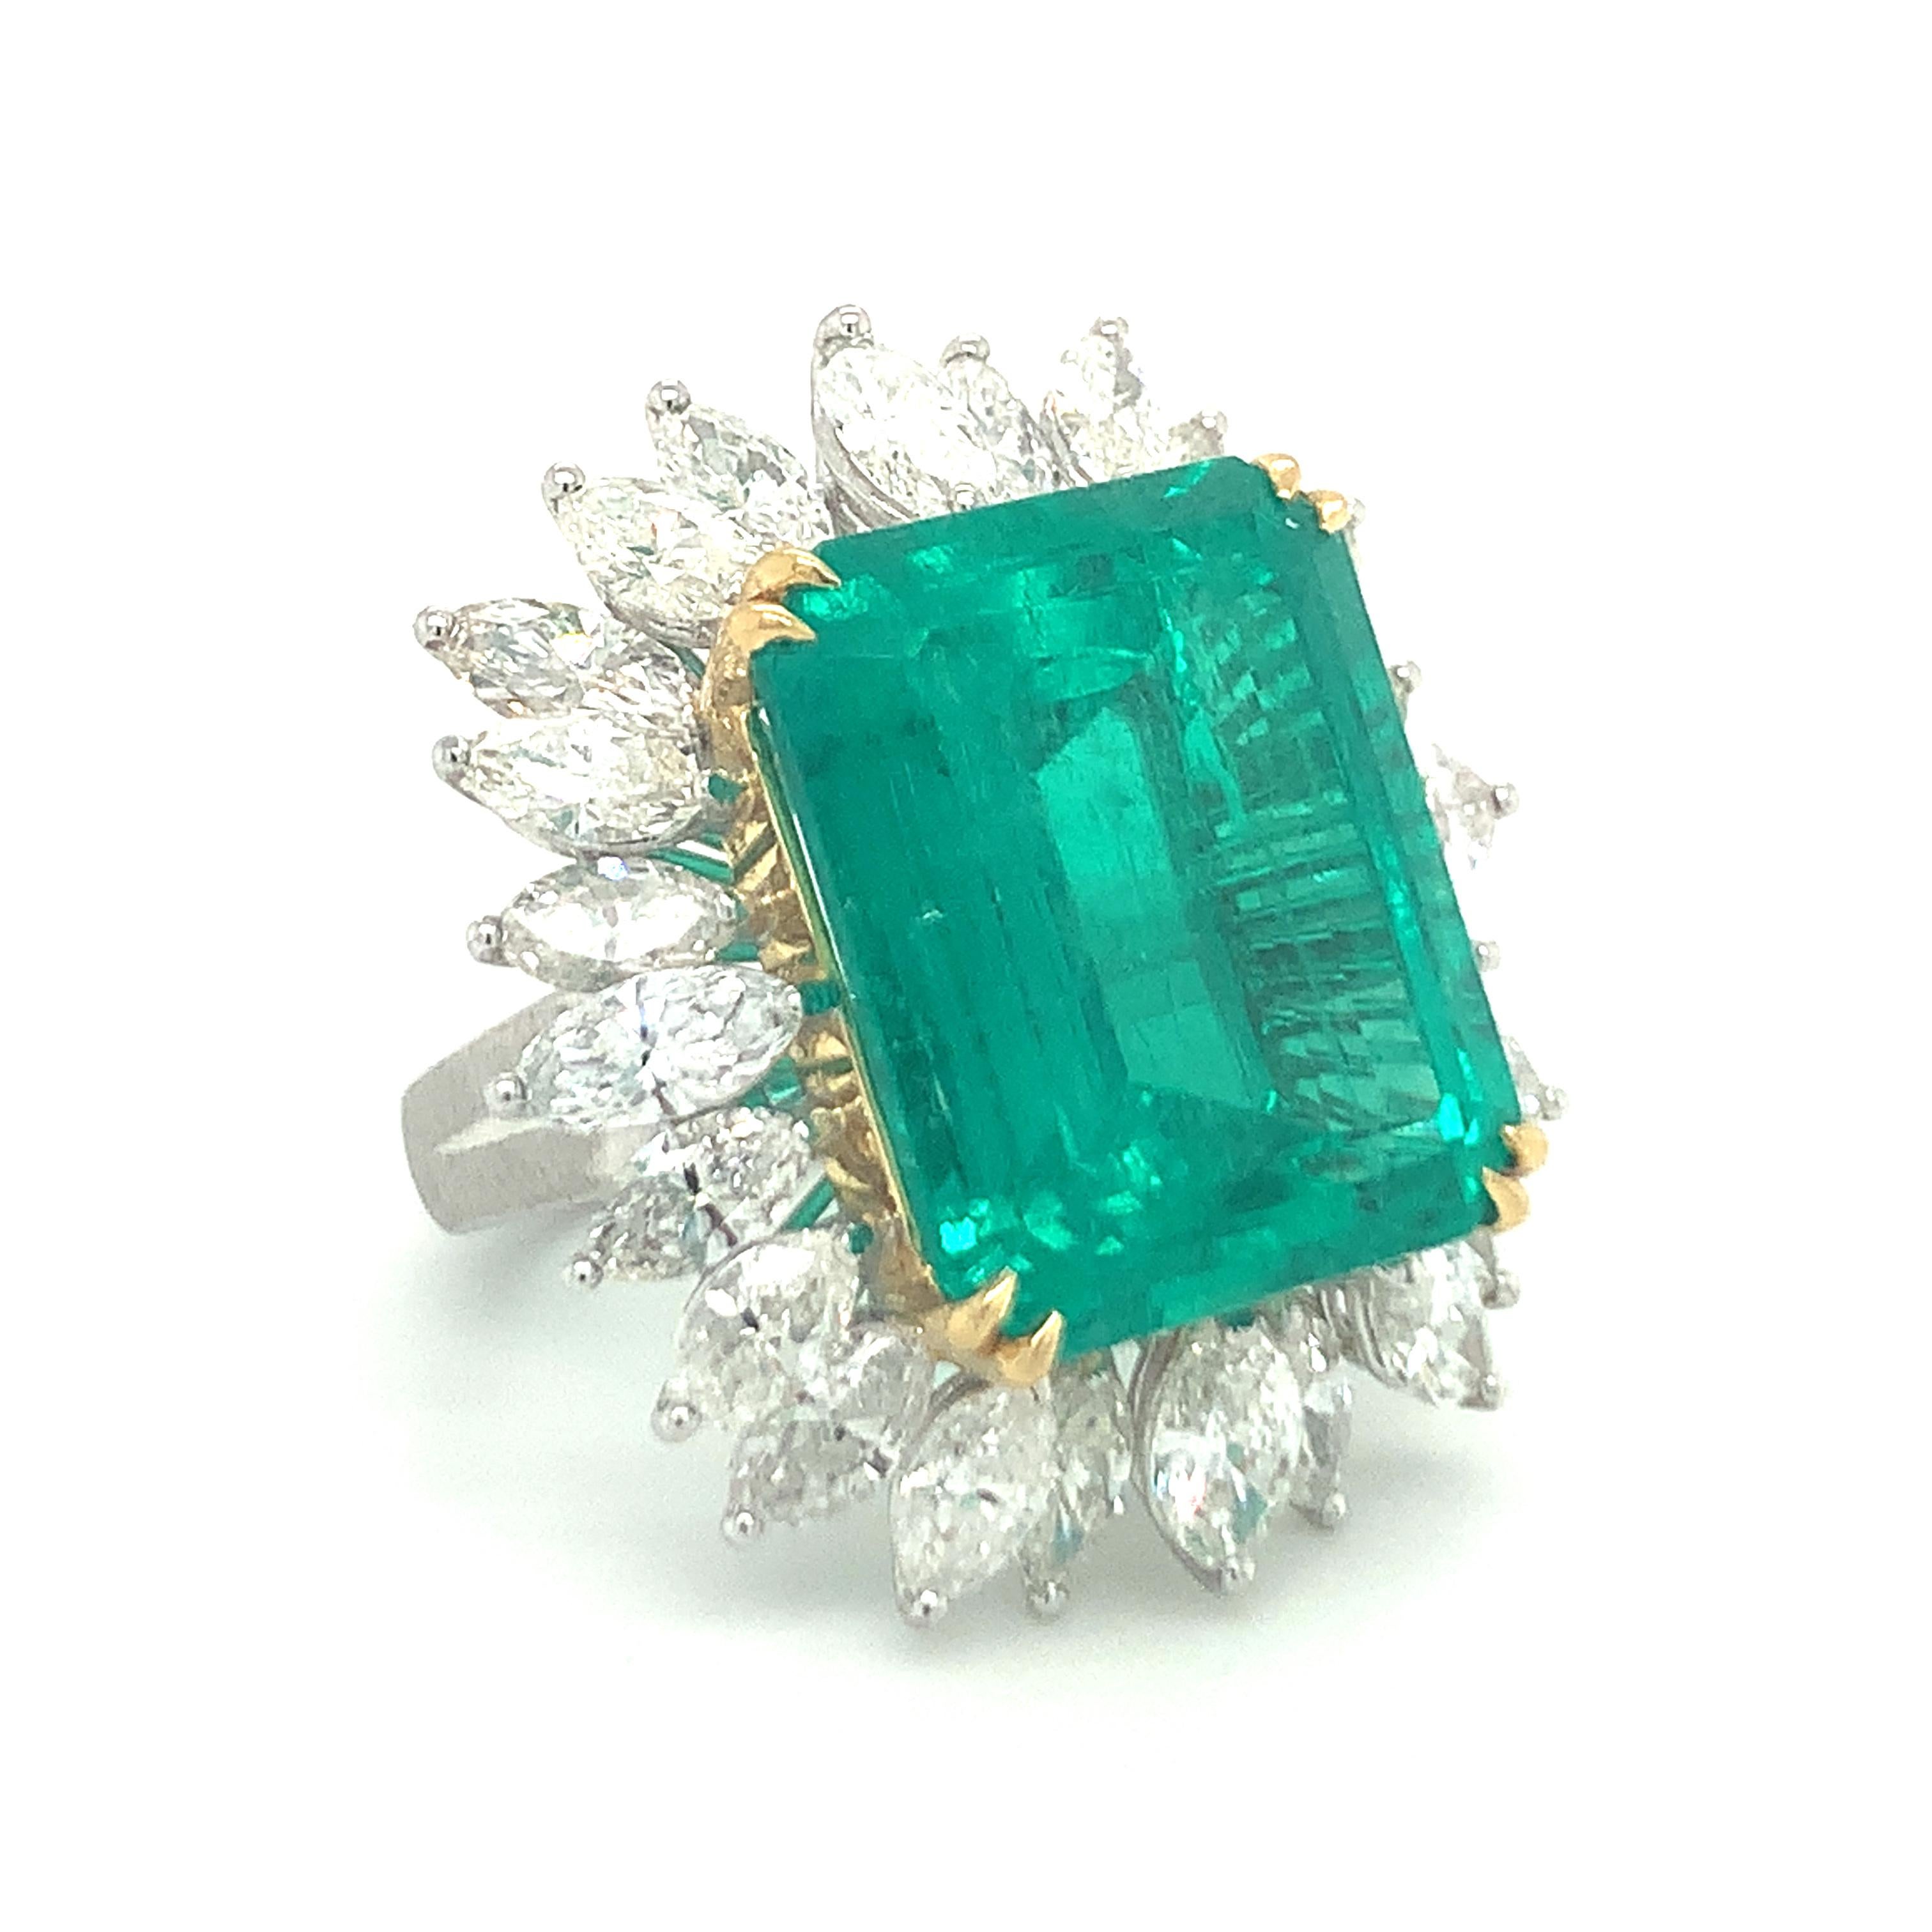 Emerald and diamond ring set in platinum and 18k yellow gold centering one prong set, emerald cut emerald with an exact weight of 19.34 ct. with GIA Report No. 2225667781 stating Colombian origin. Emerald is surrounded by 24 marquise brilliant